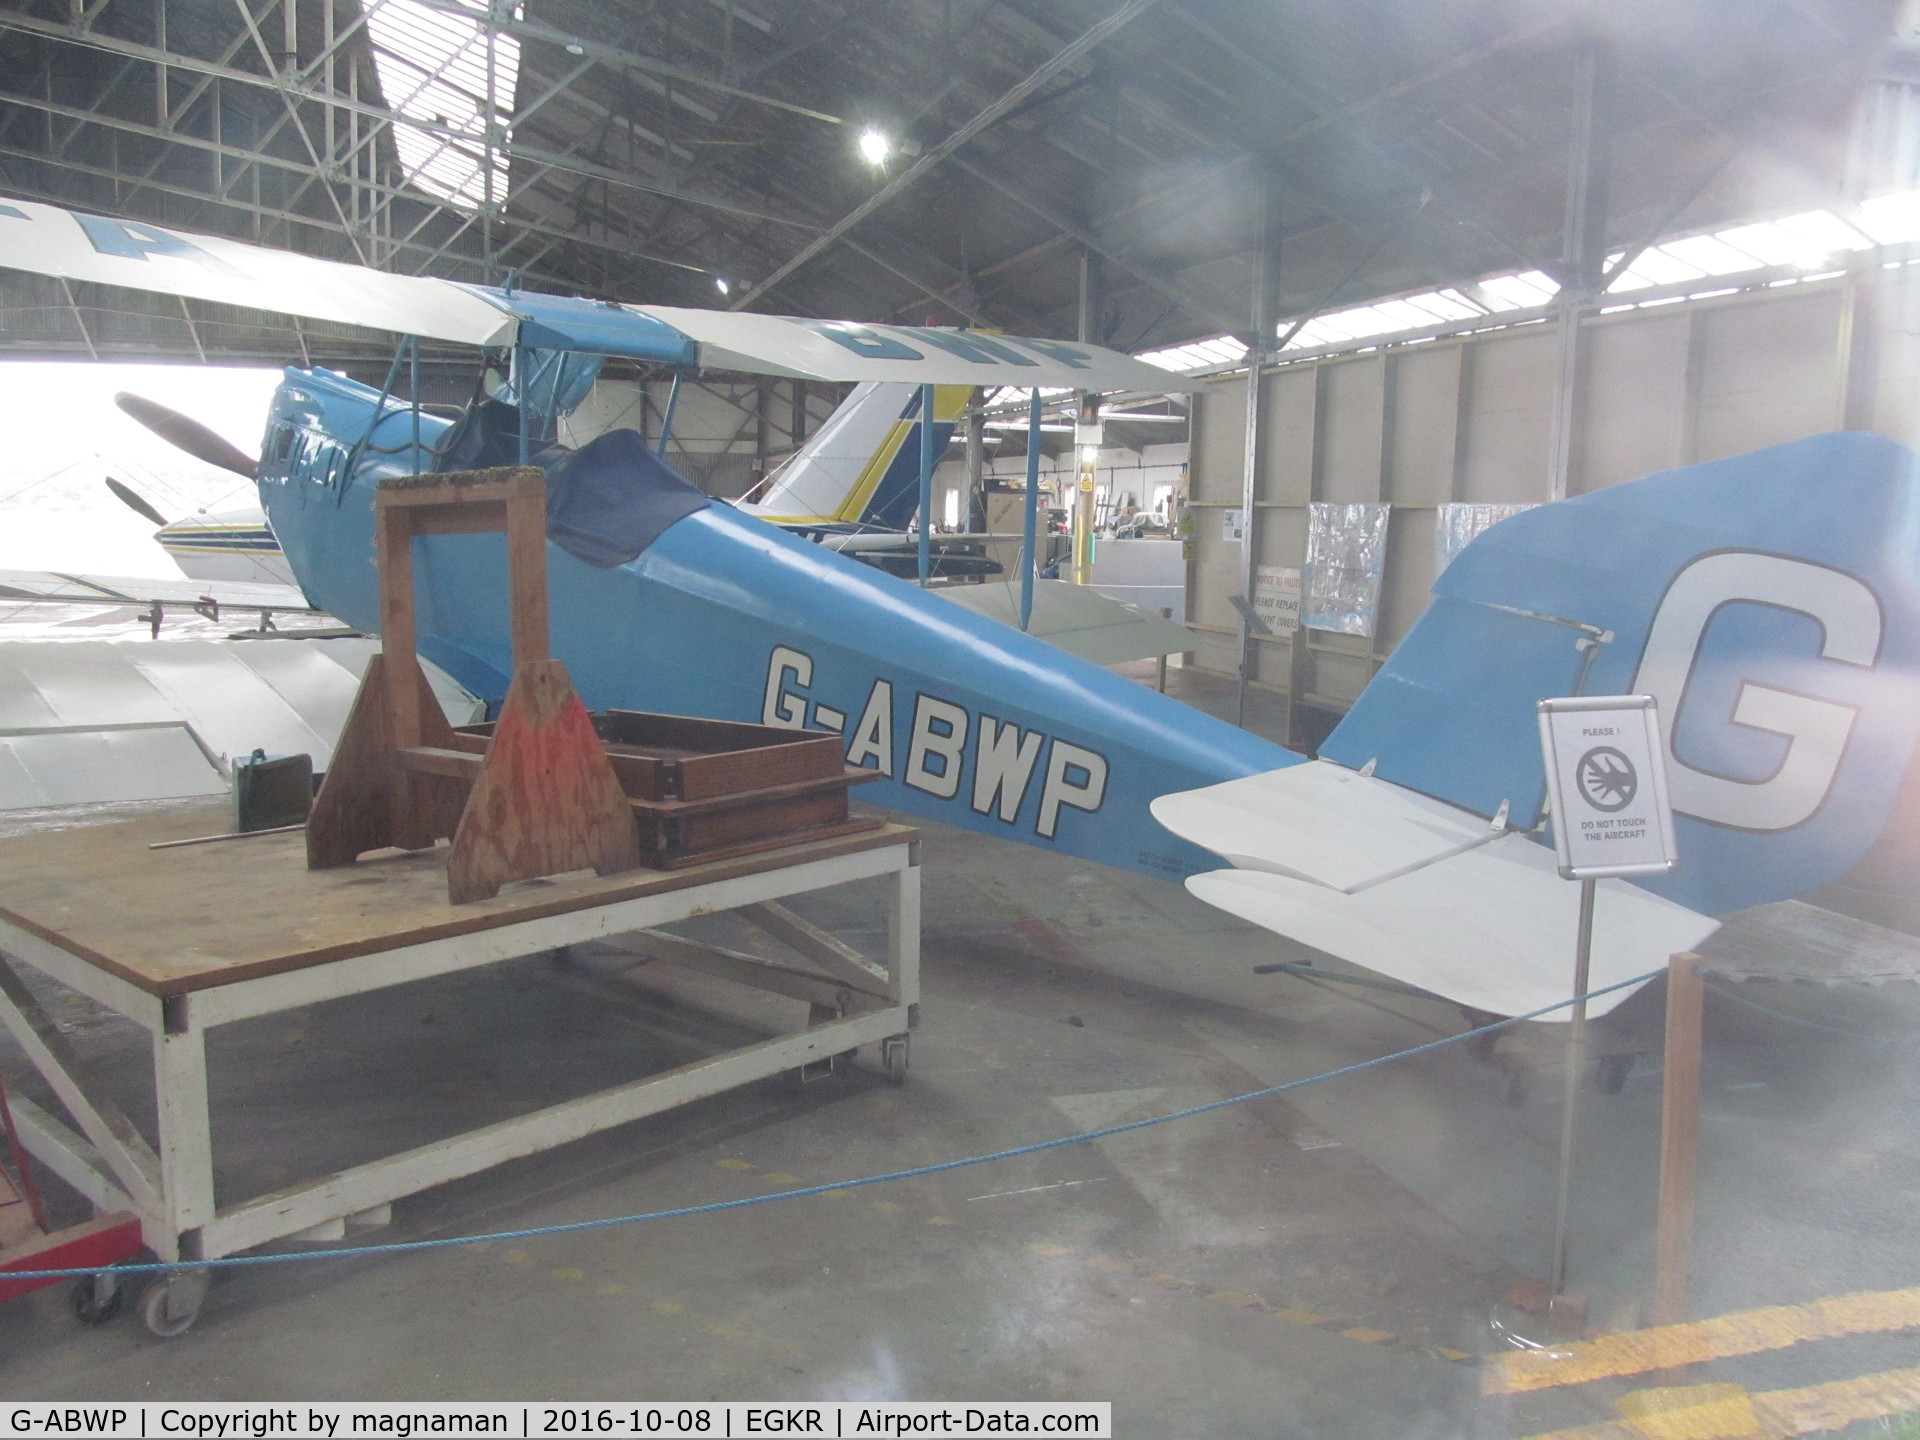 G-ABWP, 1932 Spartan Arrow C/N 78, through hangar window - only found out after you can go in hangar if you use café toilet!!!